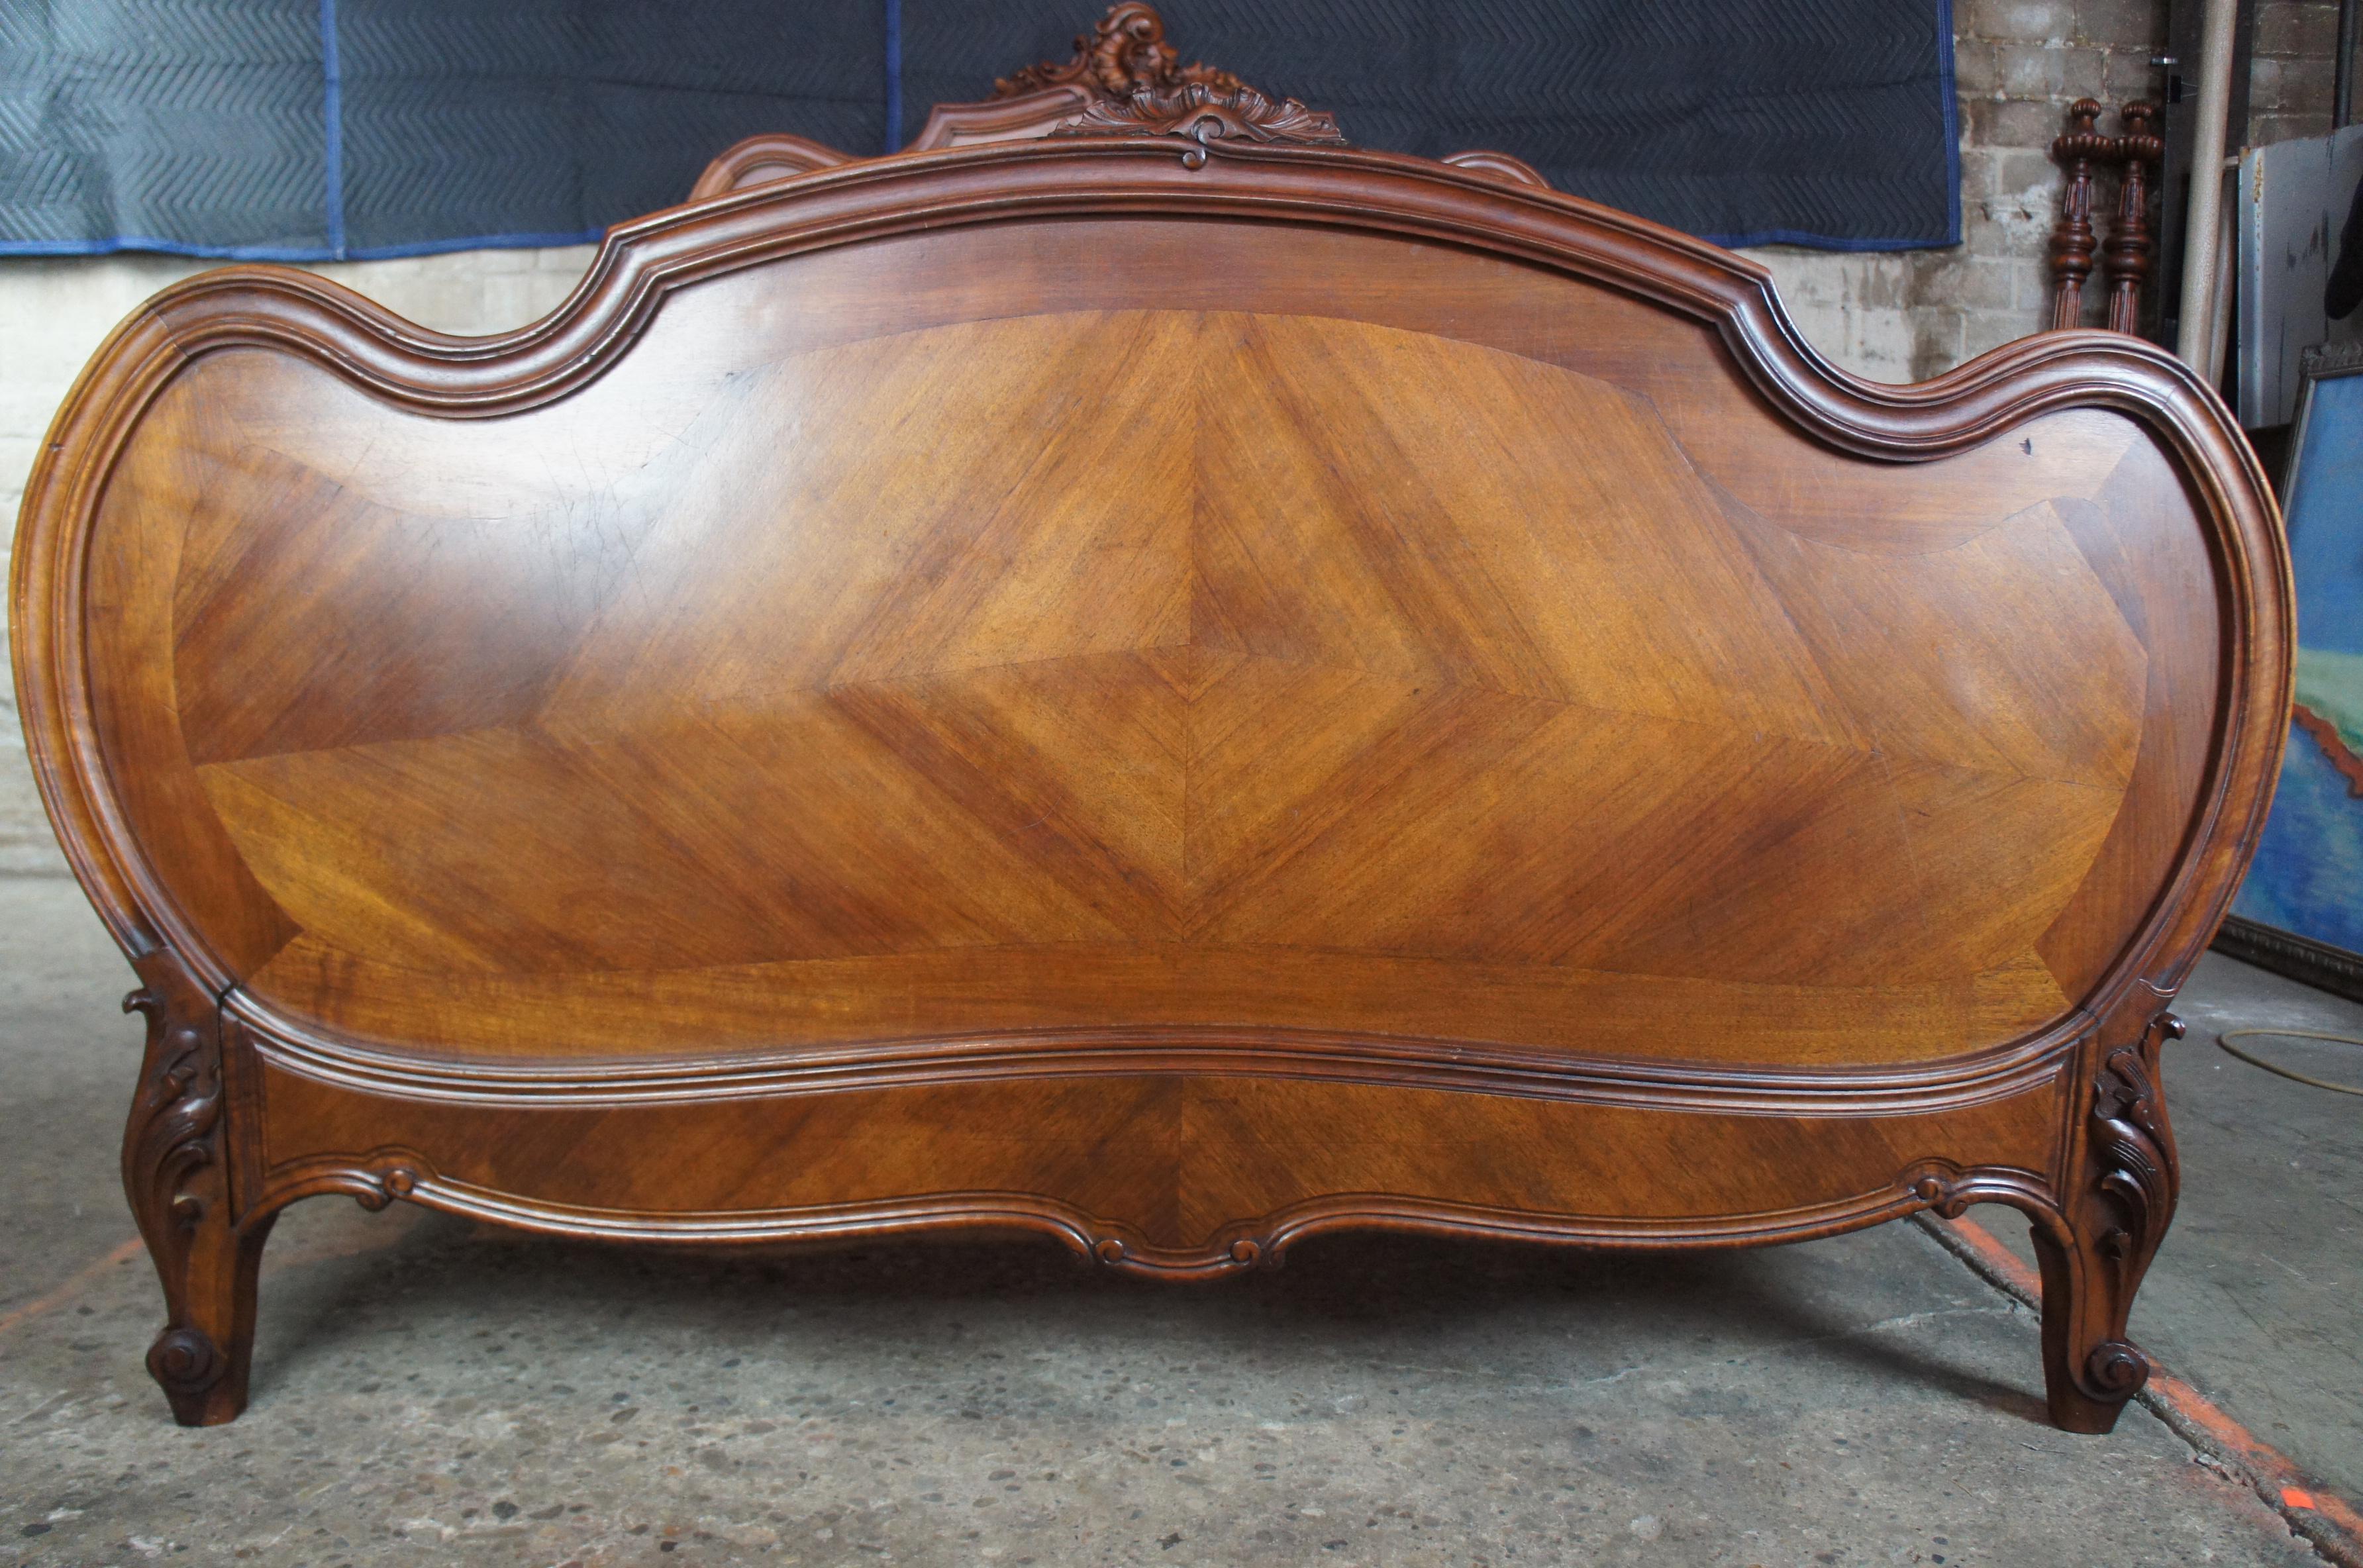 19th Century Antique French Louis XV Baroque Carved Walnut Bed Rococo Revival